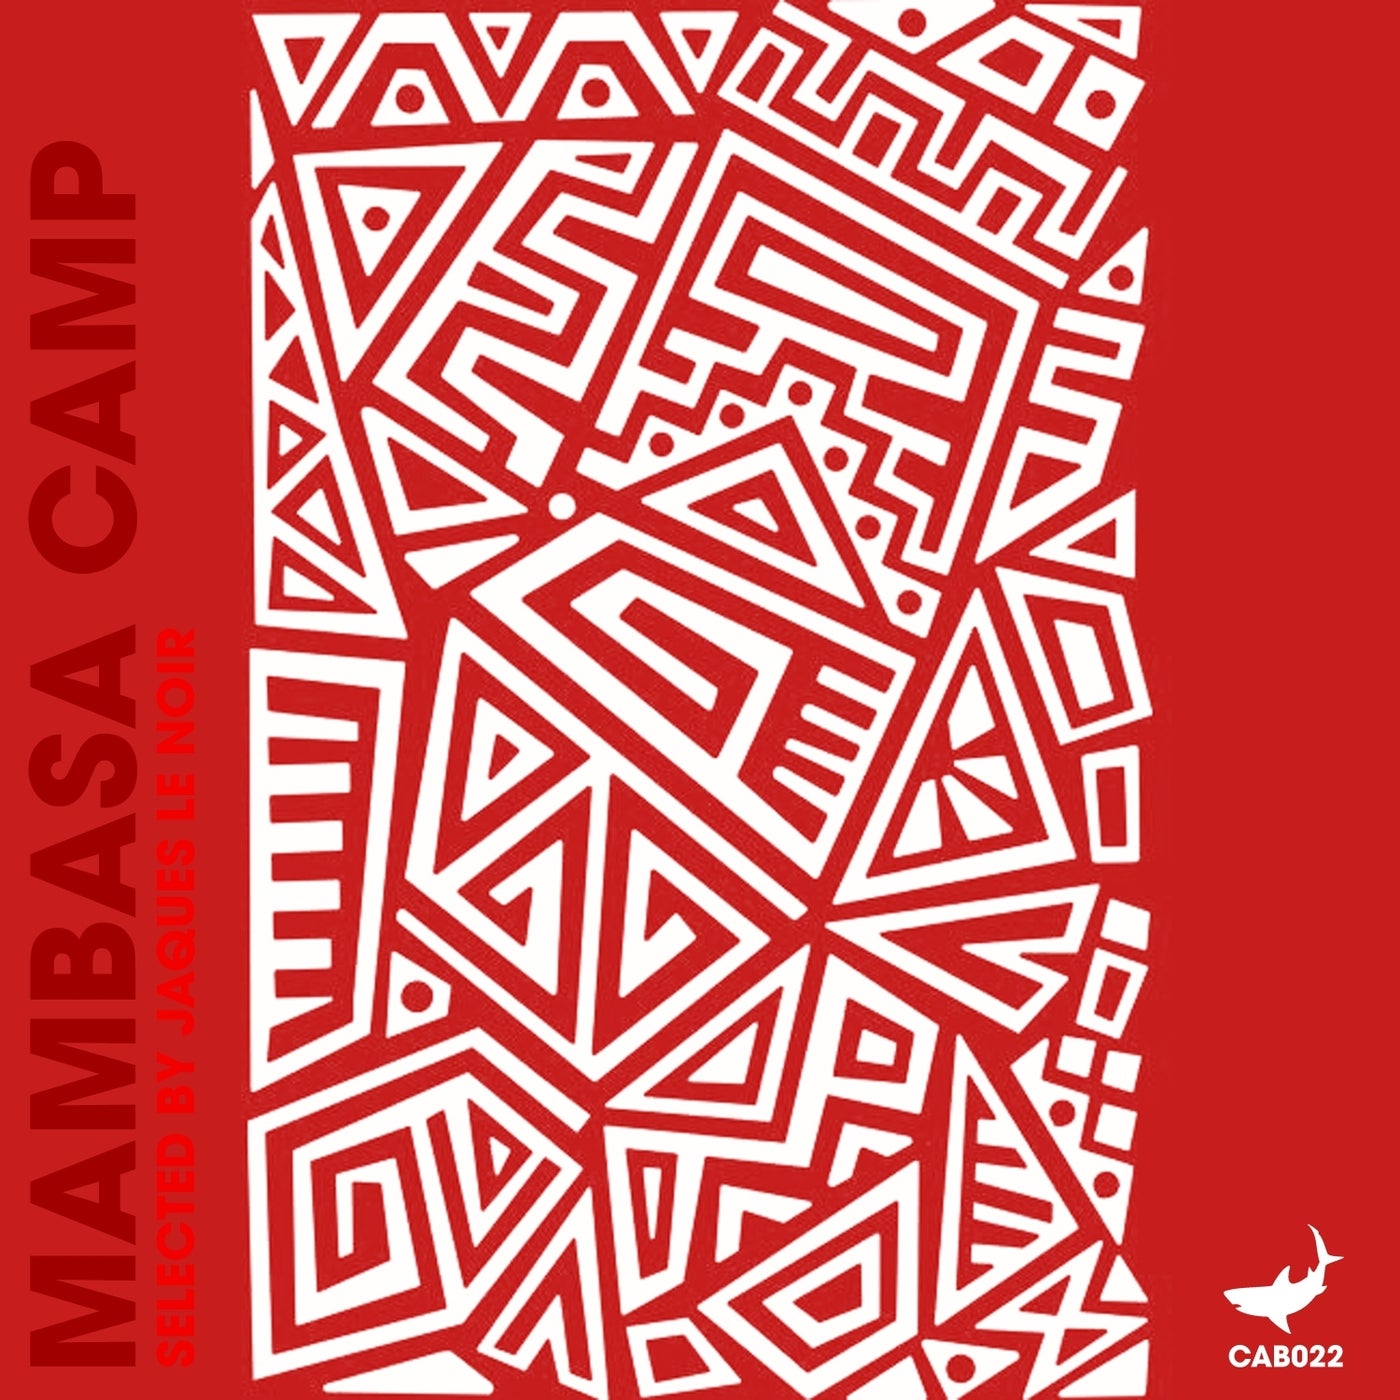 Mambasa Camp Selected by Jaques Le Noir